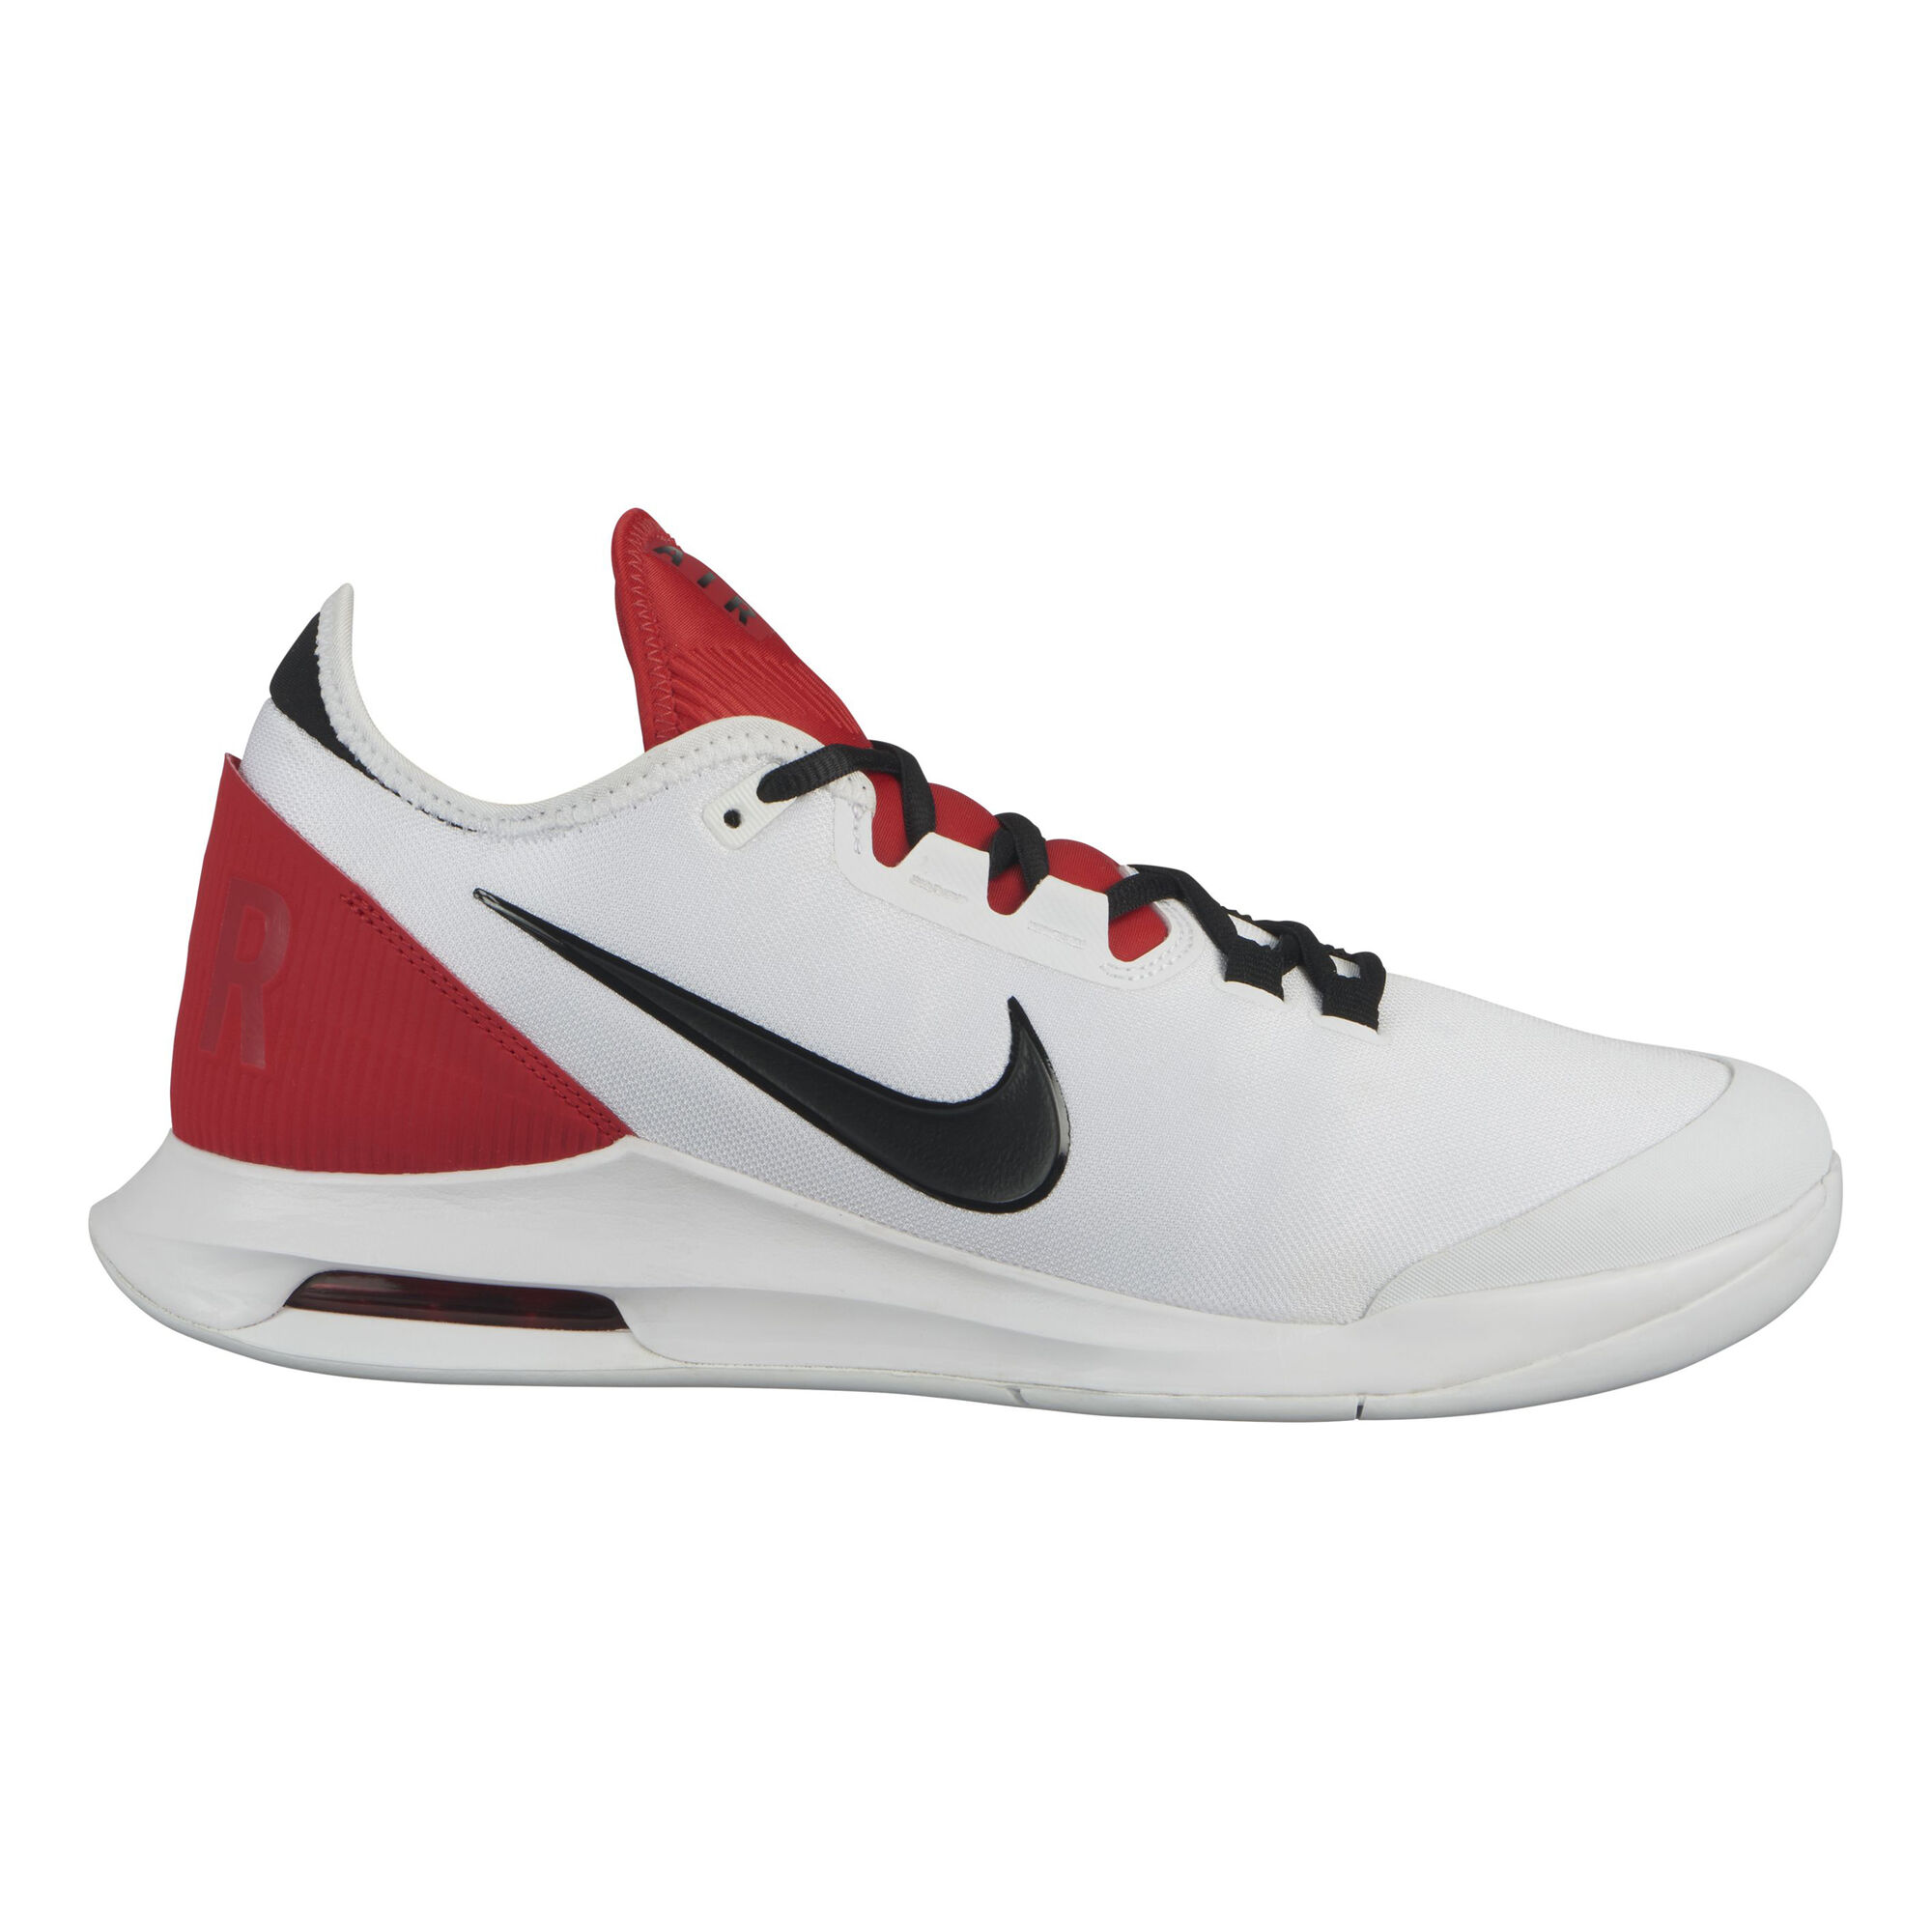 buy Nike Air Max Wildcard All Court Shoe Men - White, Red online ...